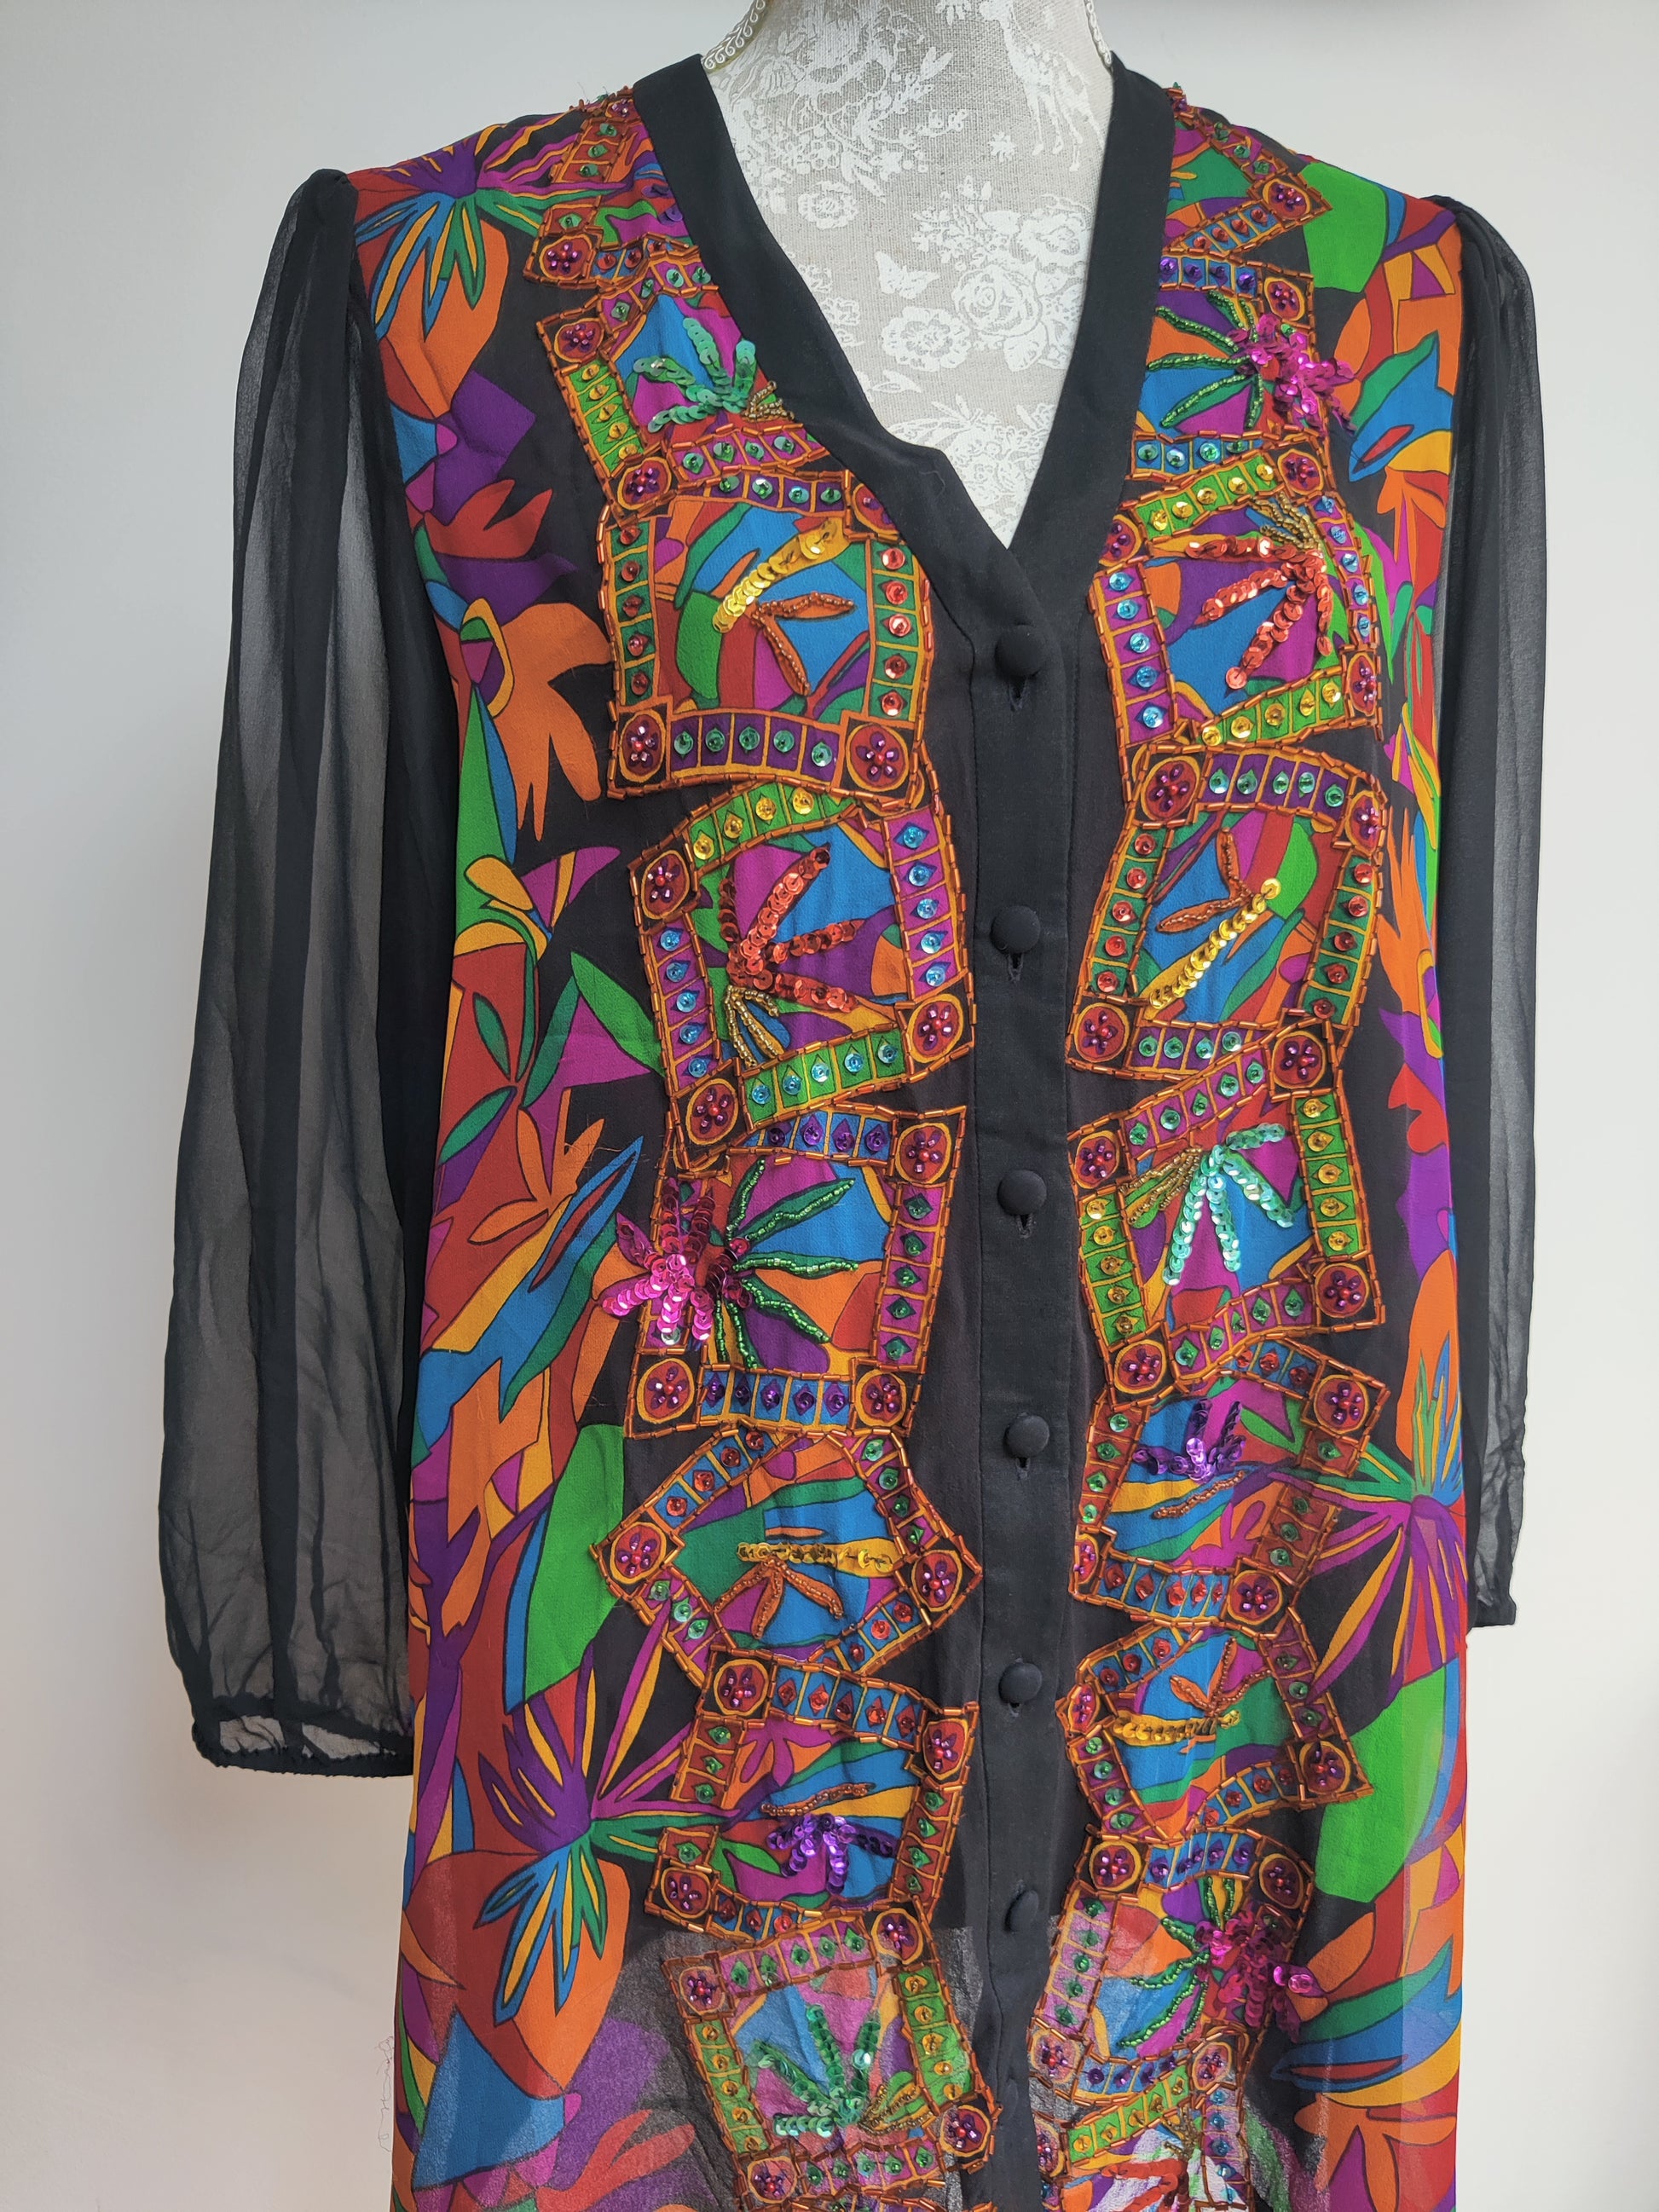 Fun 80s colourful top with semi sheer sleeves